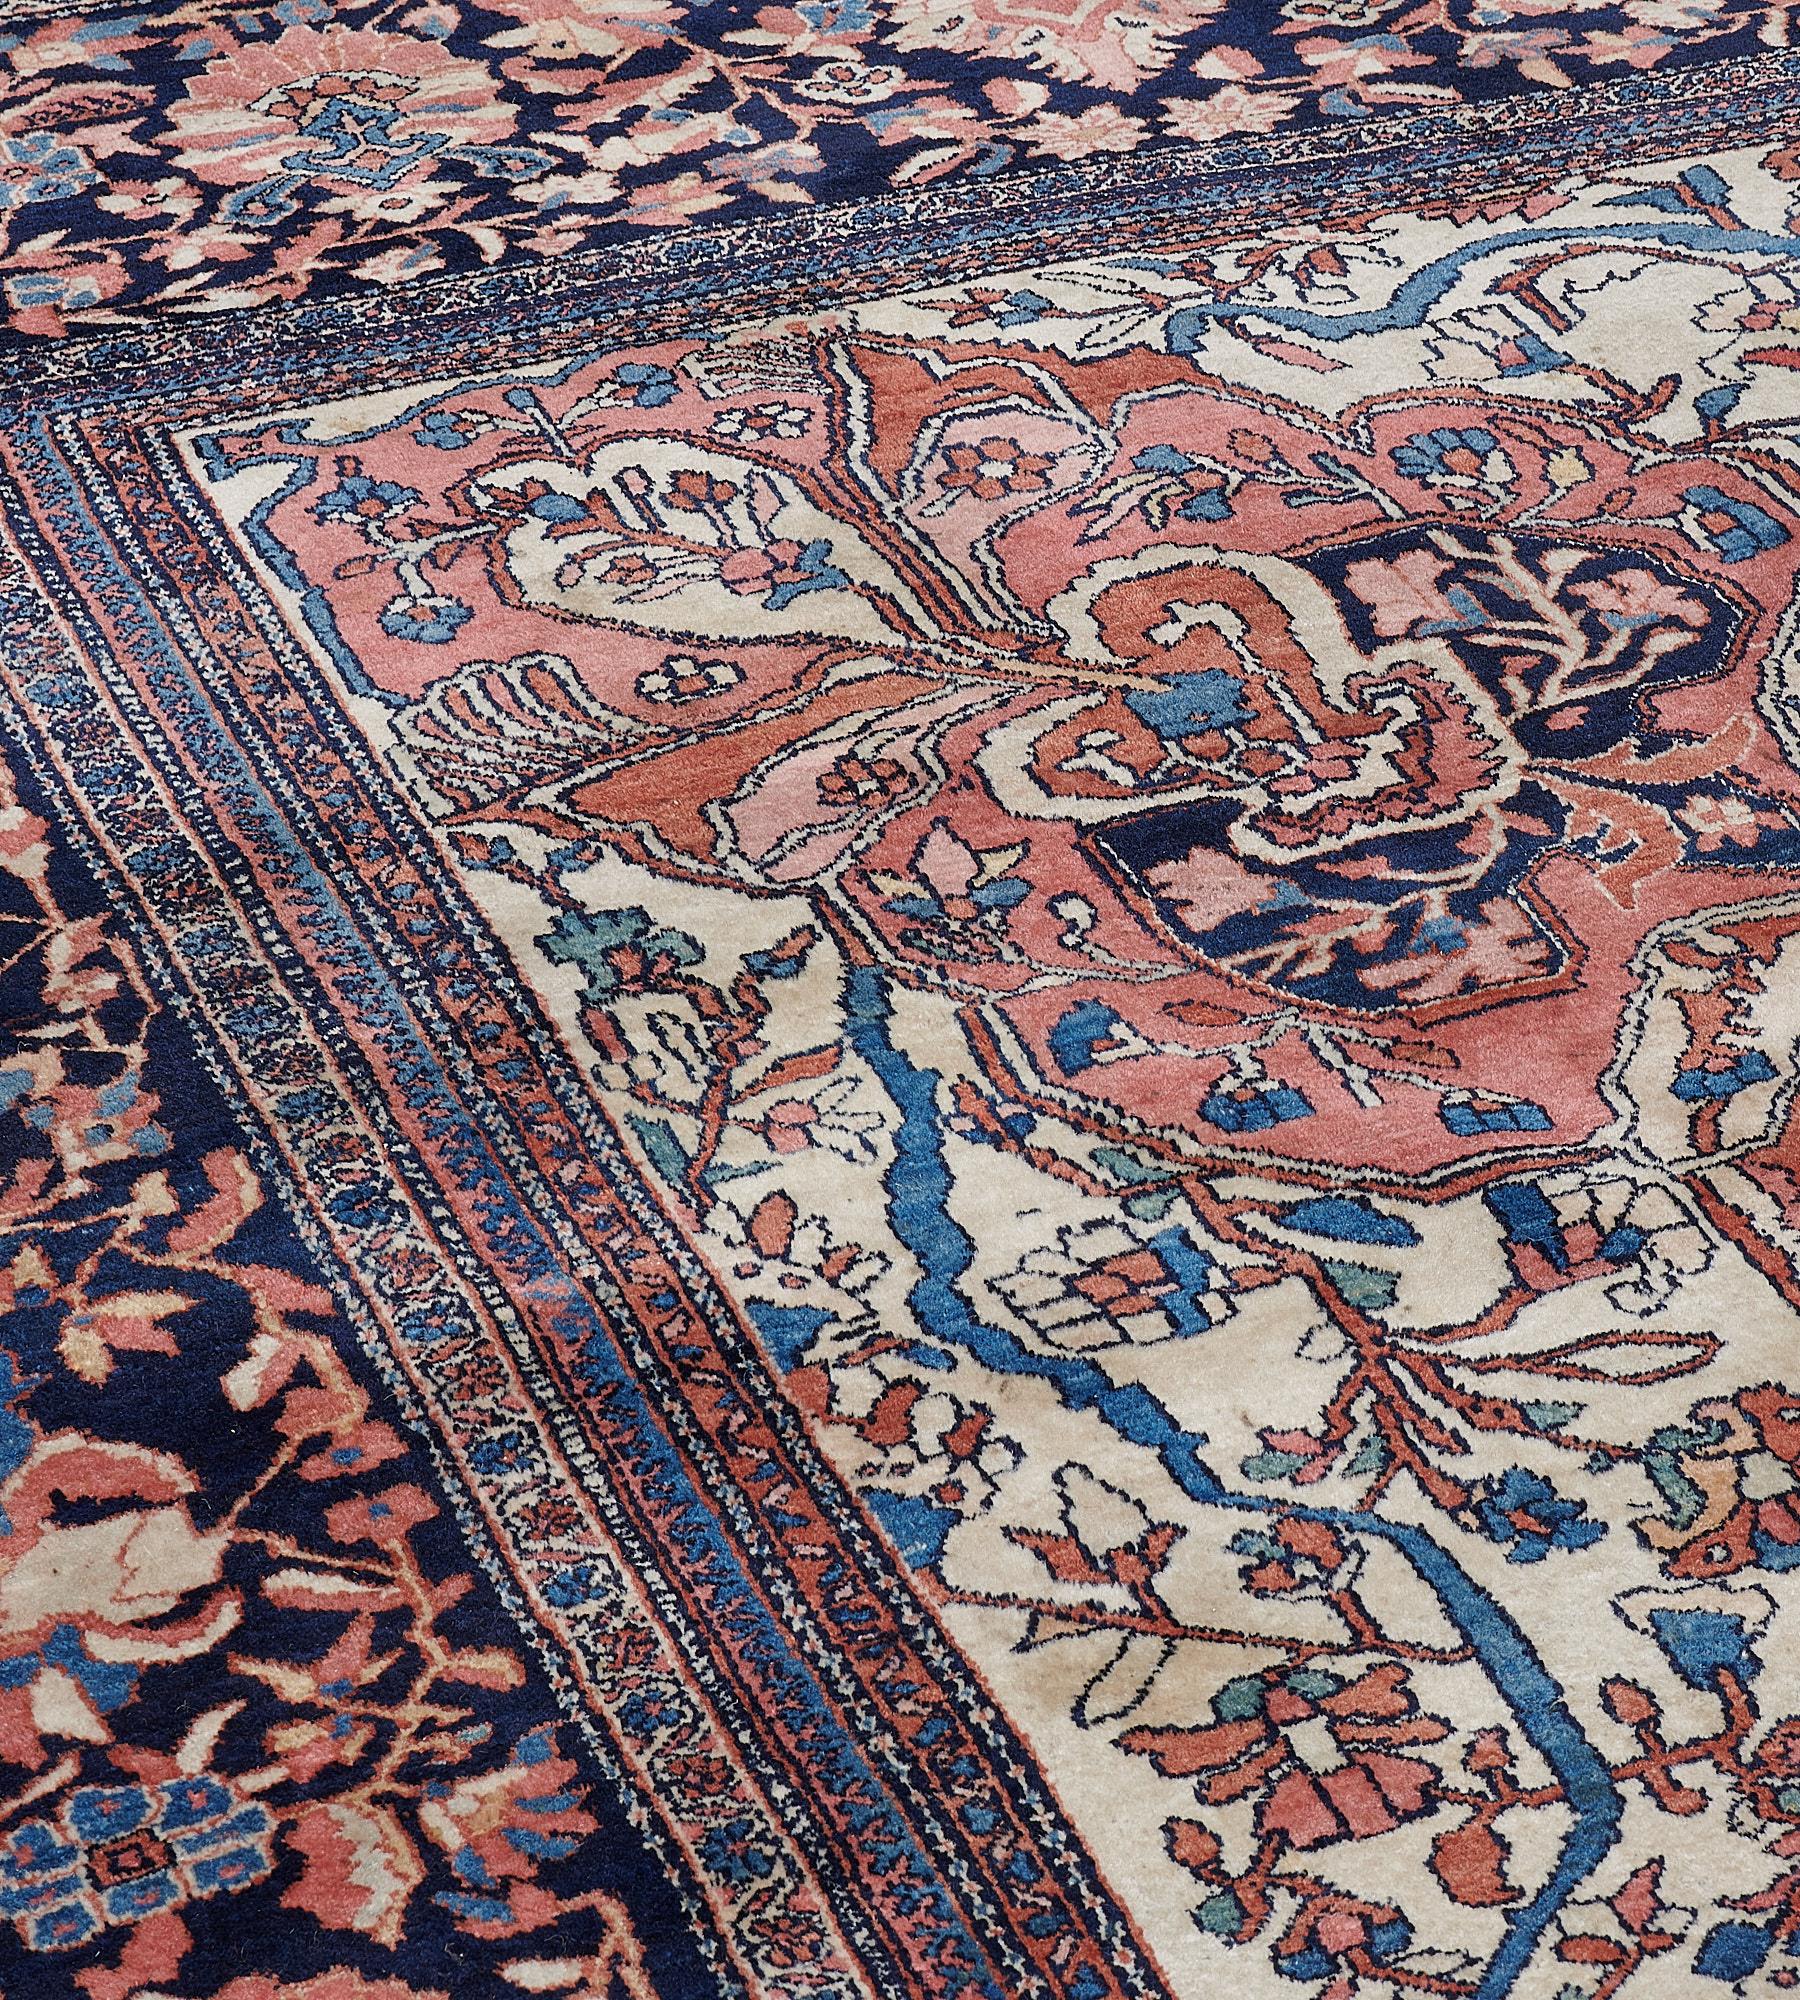 Antique Handwoven Persian Faraghan Rug in Perfect Condition For Sale 4